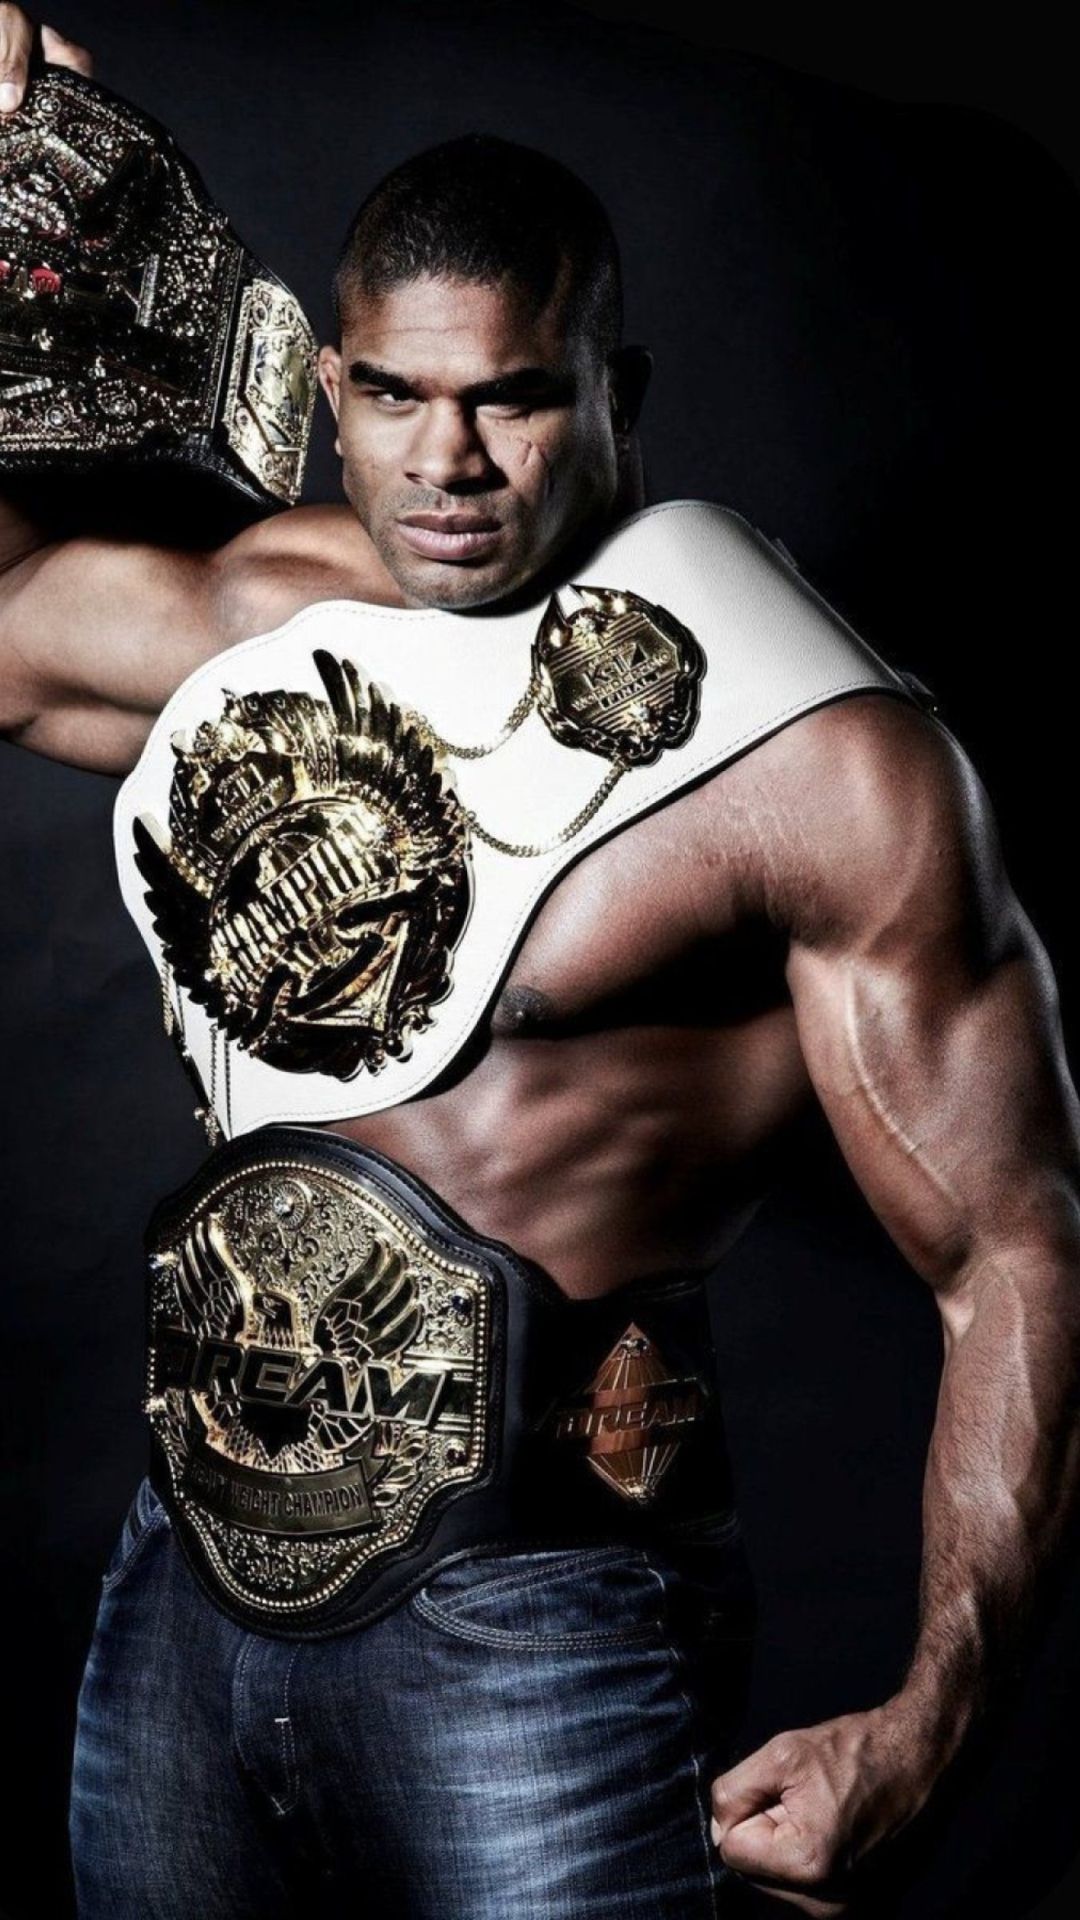 Alistair Overeem Mma Ufc Fighter Mixed Wallpaper for iPhone 6 Plus